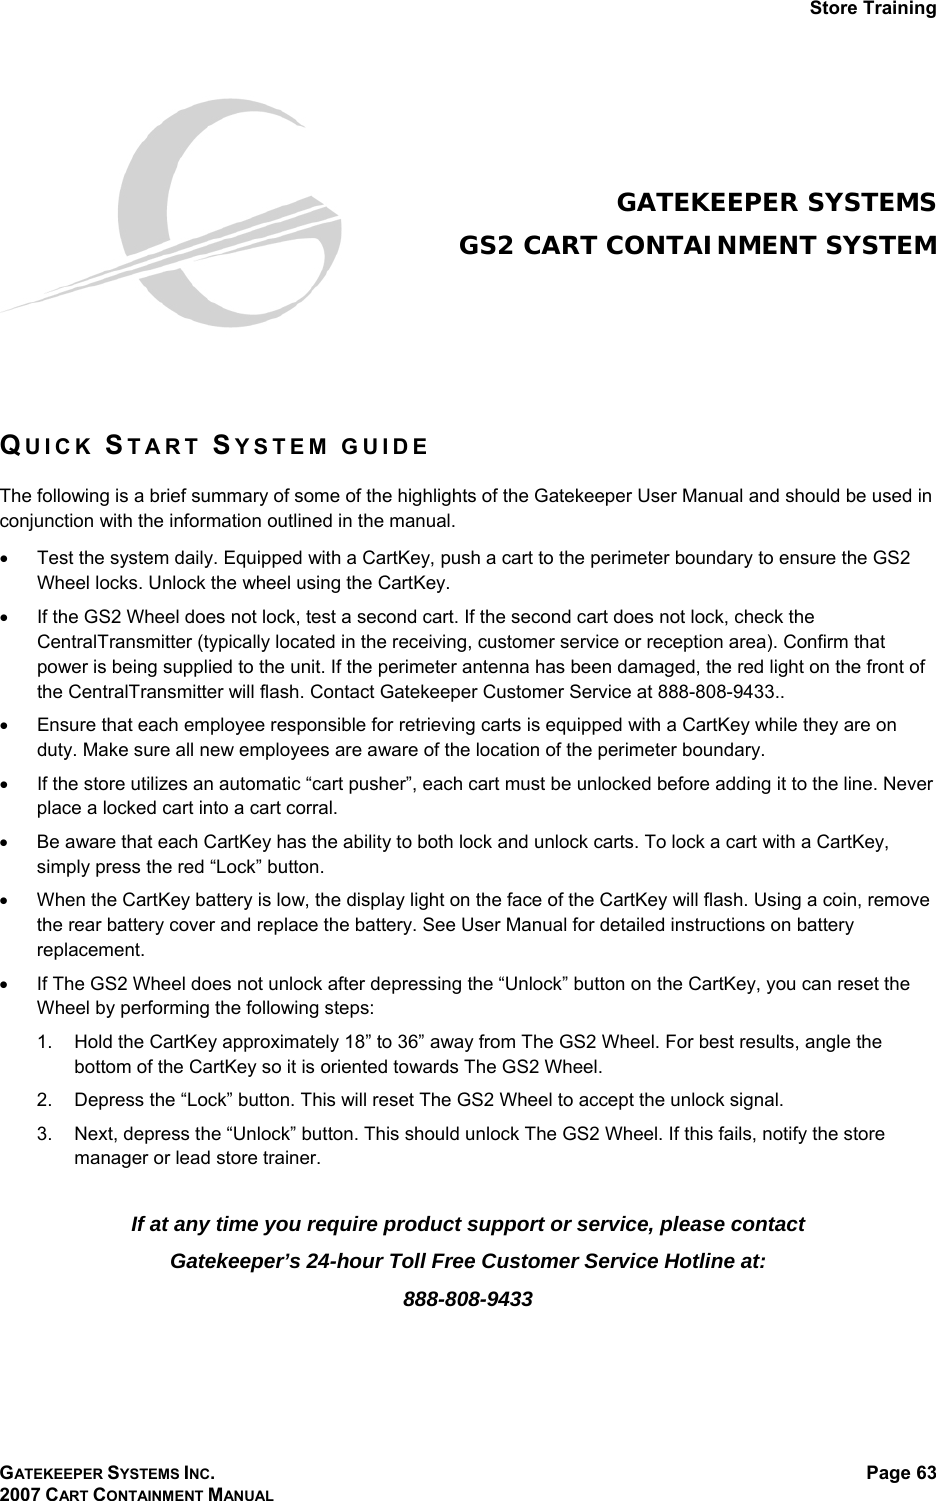 Store Training GATEKEEPER SYSTEMS INC. 2007 CART CONTAINMENT MANUAL Page 63    GATEKEEPER SYSTEMS GS2 CART CONTAINMENT SYSTEM    QUICK START SYSTEM GUIDE   The following is a brief summary of some of the highlights of the Gatekeeper User Manual and should be used in conjunction with the information outlined in the manual. •  Test the system daily. Equipped with a CartKey, push a cart to the perimeter boundary to ensure the GS2 Wheel locks. Unlock the wheel using the CartKey. •  If the GS2 Wheel does not lock, test a second cart. If the second cart does not lock, check the CentralTransmitter (typically located in the receiving, customer service or reception area). Confirm that power is being supplied to the unit. If the perimeter antenna has been damaged, the red light on the front of the CentralTransmitter will flash. Contact Gatekeeper Customer Service at 888-808-9433.. •  Ensure that each employee responsible for retrieving carts is equipped with a CartKey while they are on duty. Make sure all new employees are aware of the location of the perimeter boundary. •  If the store utilizes an automatic “cart pusher”, each cart must be unlocked before adding it to the line. Never place a locked cart into a cart corral. •  Be aware that each CartKey has the ability to both lock and unlock carts. To lock a cart with a CartKey, simply press the red “Lock” button. •  When the CartKey battery is low, the display light on the face of the CartKey will flash. Using a coin, remove the rear battery cover and replace the battery. See User Manual for detailed instructions on battery replacement. •  If The GS2 Wheel does not unlock after depressing the “Unlock” button on the CartKey, you can reset the Wheel by performing the following steps:  1.  Hold the CartKey approximately 18” to 36” away from The GS2 Wheel. For best results, angle the bottom of the CartKey so it is oriented towards The GS2 Wheel. 2.  Depress the “Lock” button. This will reset The GS2 Wheel to accept the unlock signal. 3.  Next, depress the “Unlock” button. This should unlock The GS2 Wheel. If this fails, notify the store manager or lead store trainer.  If at any time you require product support or service, please contact  Gatekeeper’s 24-hour Toll Free Customer Service Hotline at: 888-808-9433  